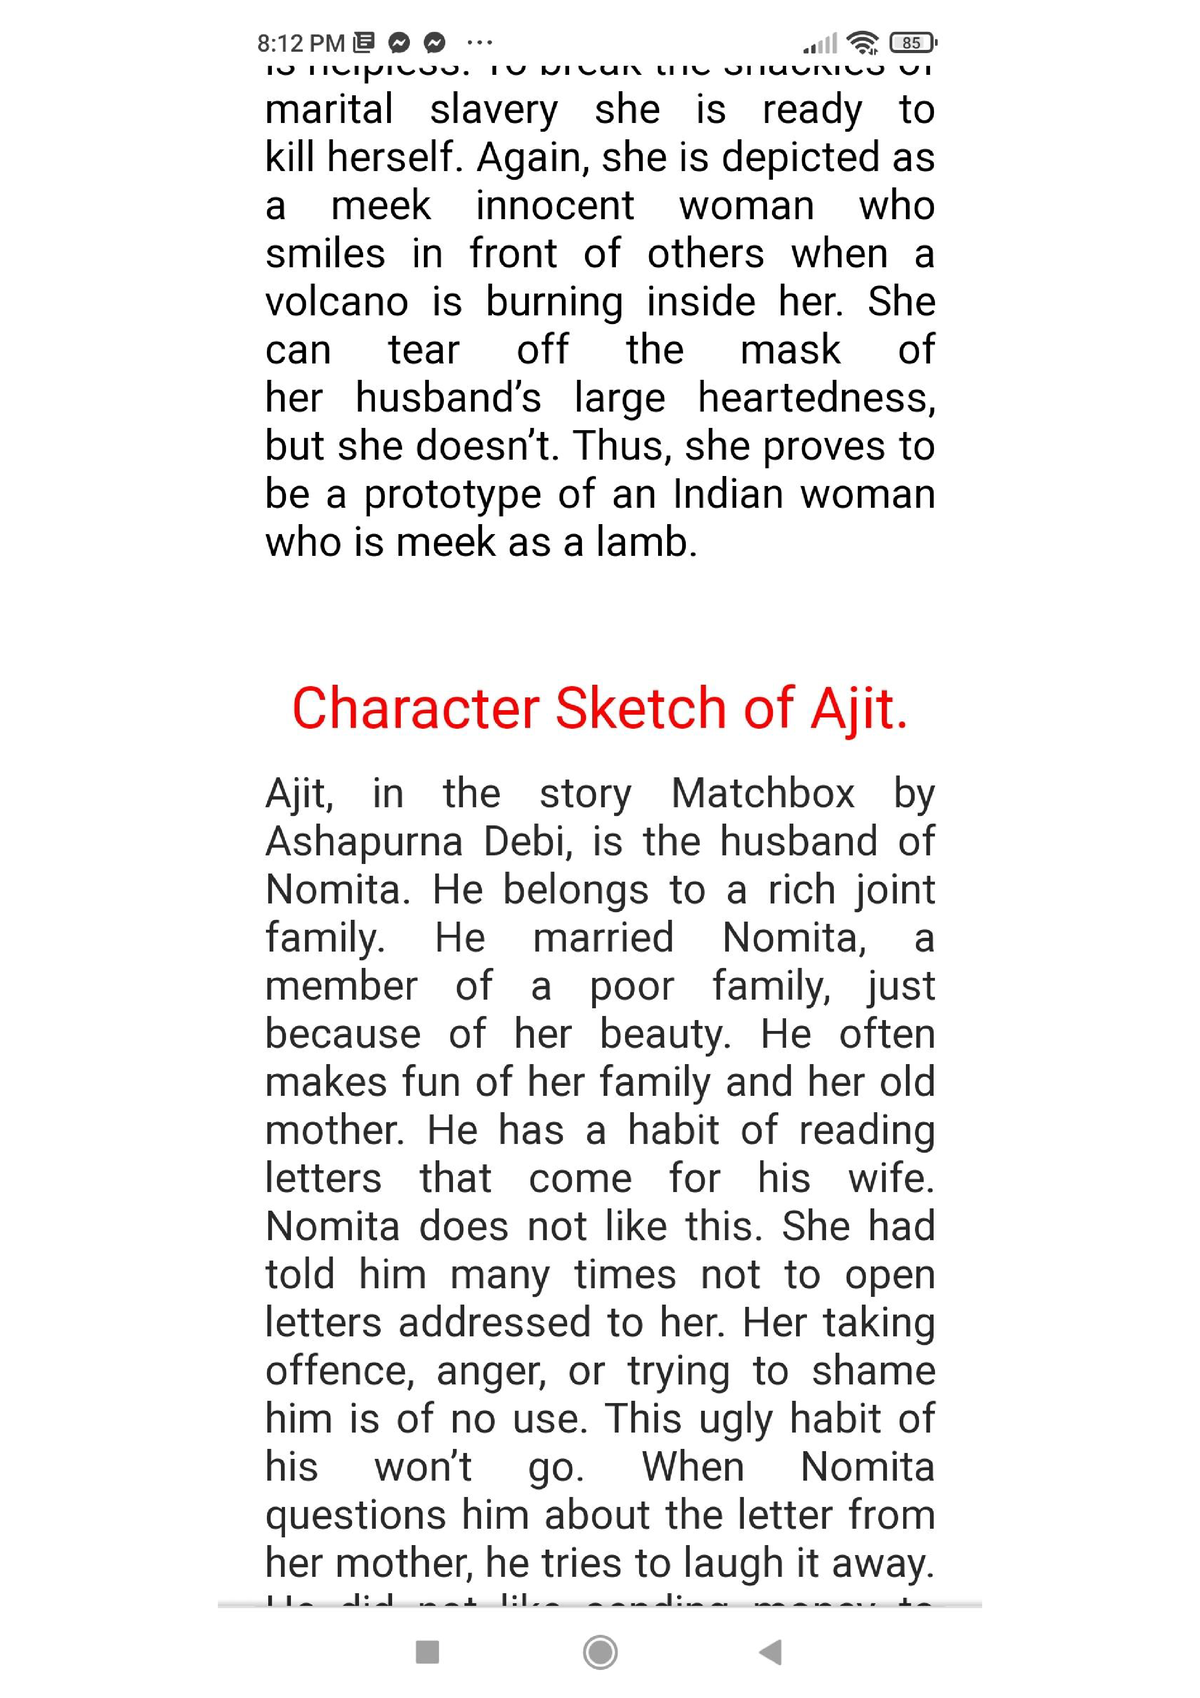 XIIEnglishUnit1 Lesson 2 character sketch of nomita  Nomita in the  story M typical Indian  Studocu